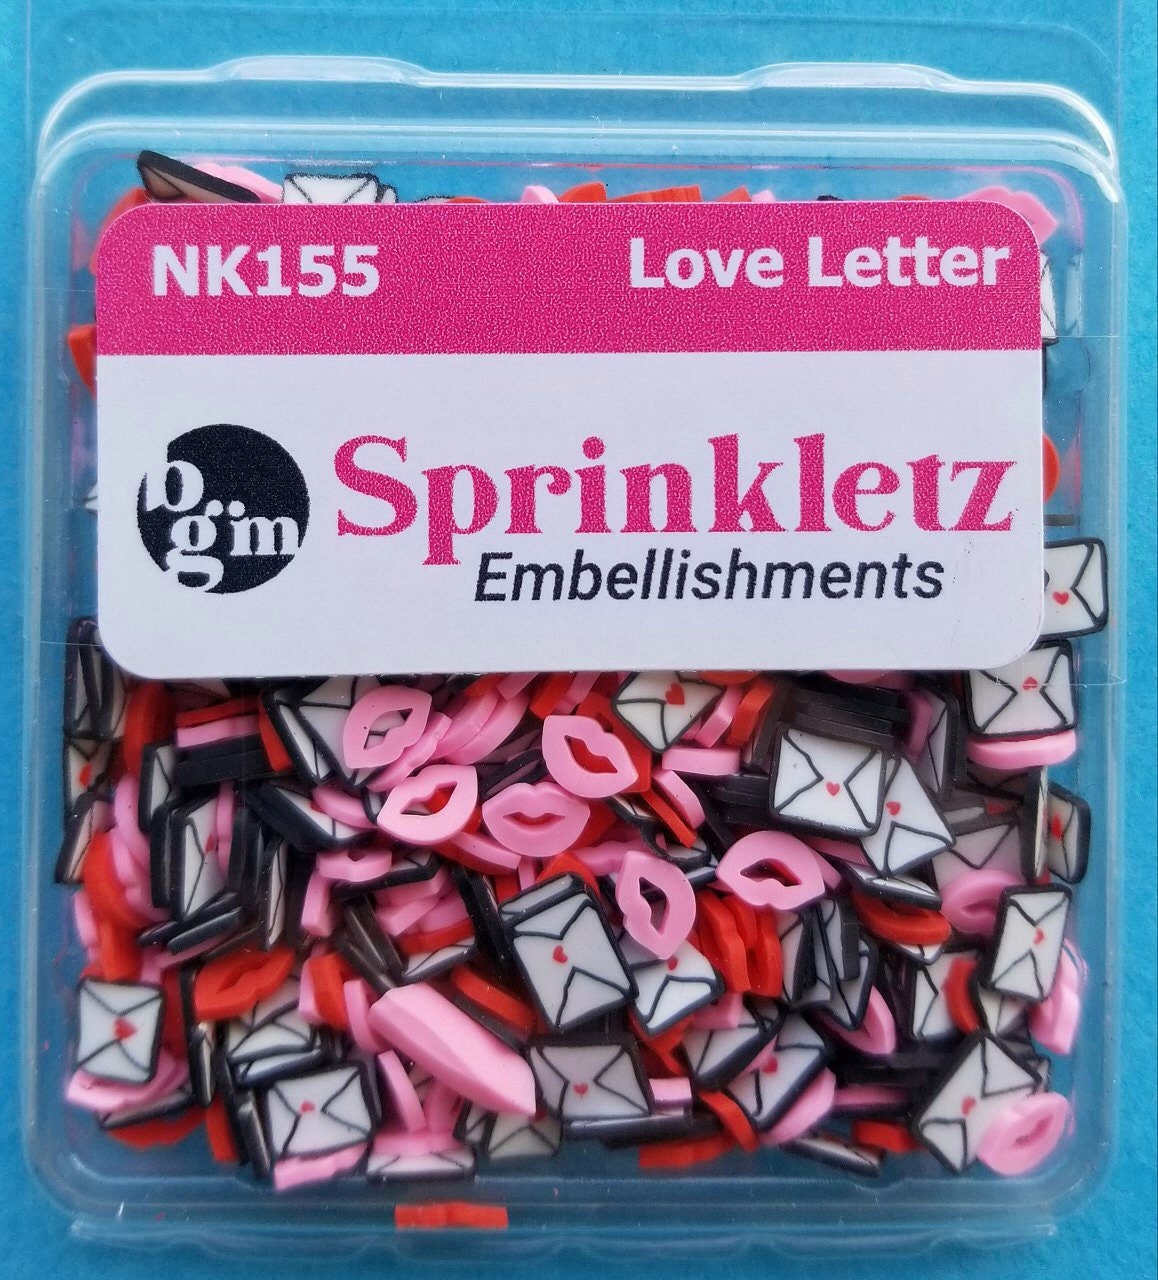 Buttons Galore Sprinkletz Embellishments for Crafts, Tiny Polymer Clay  Shapes & Unique Designs - Love Letter- 3 Pack